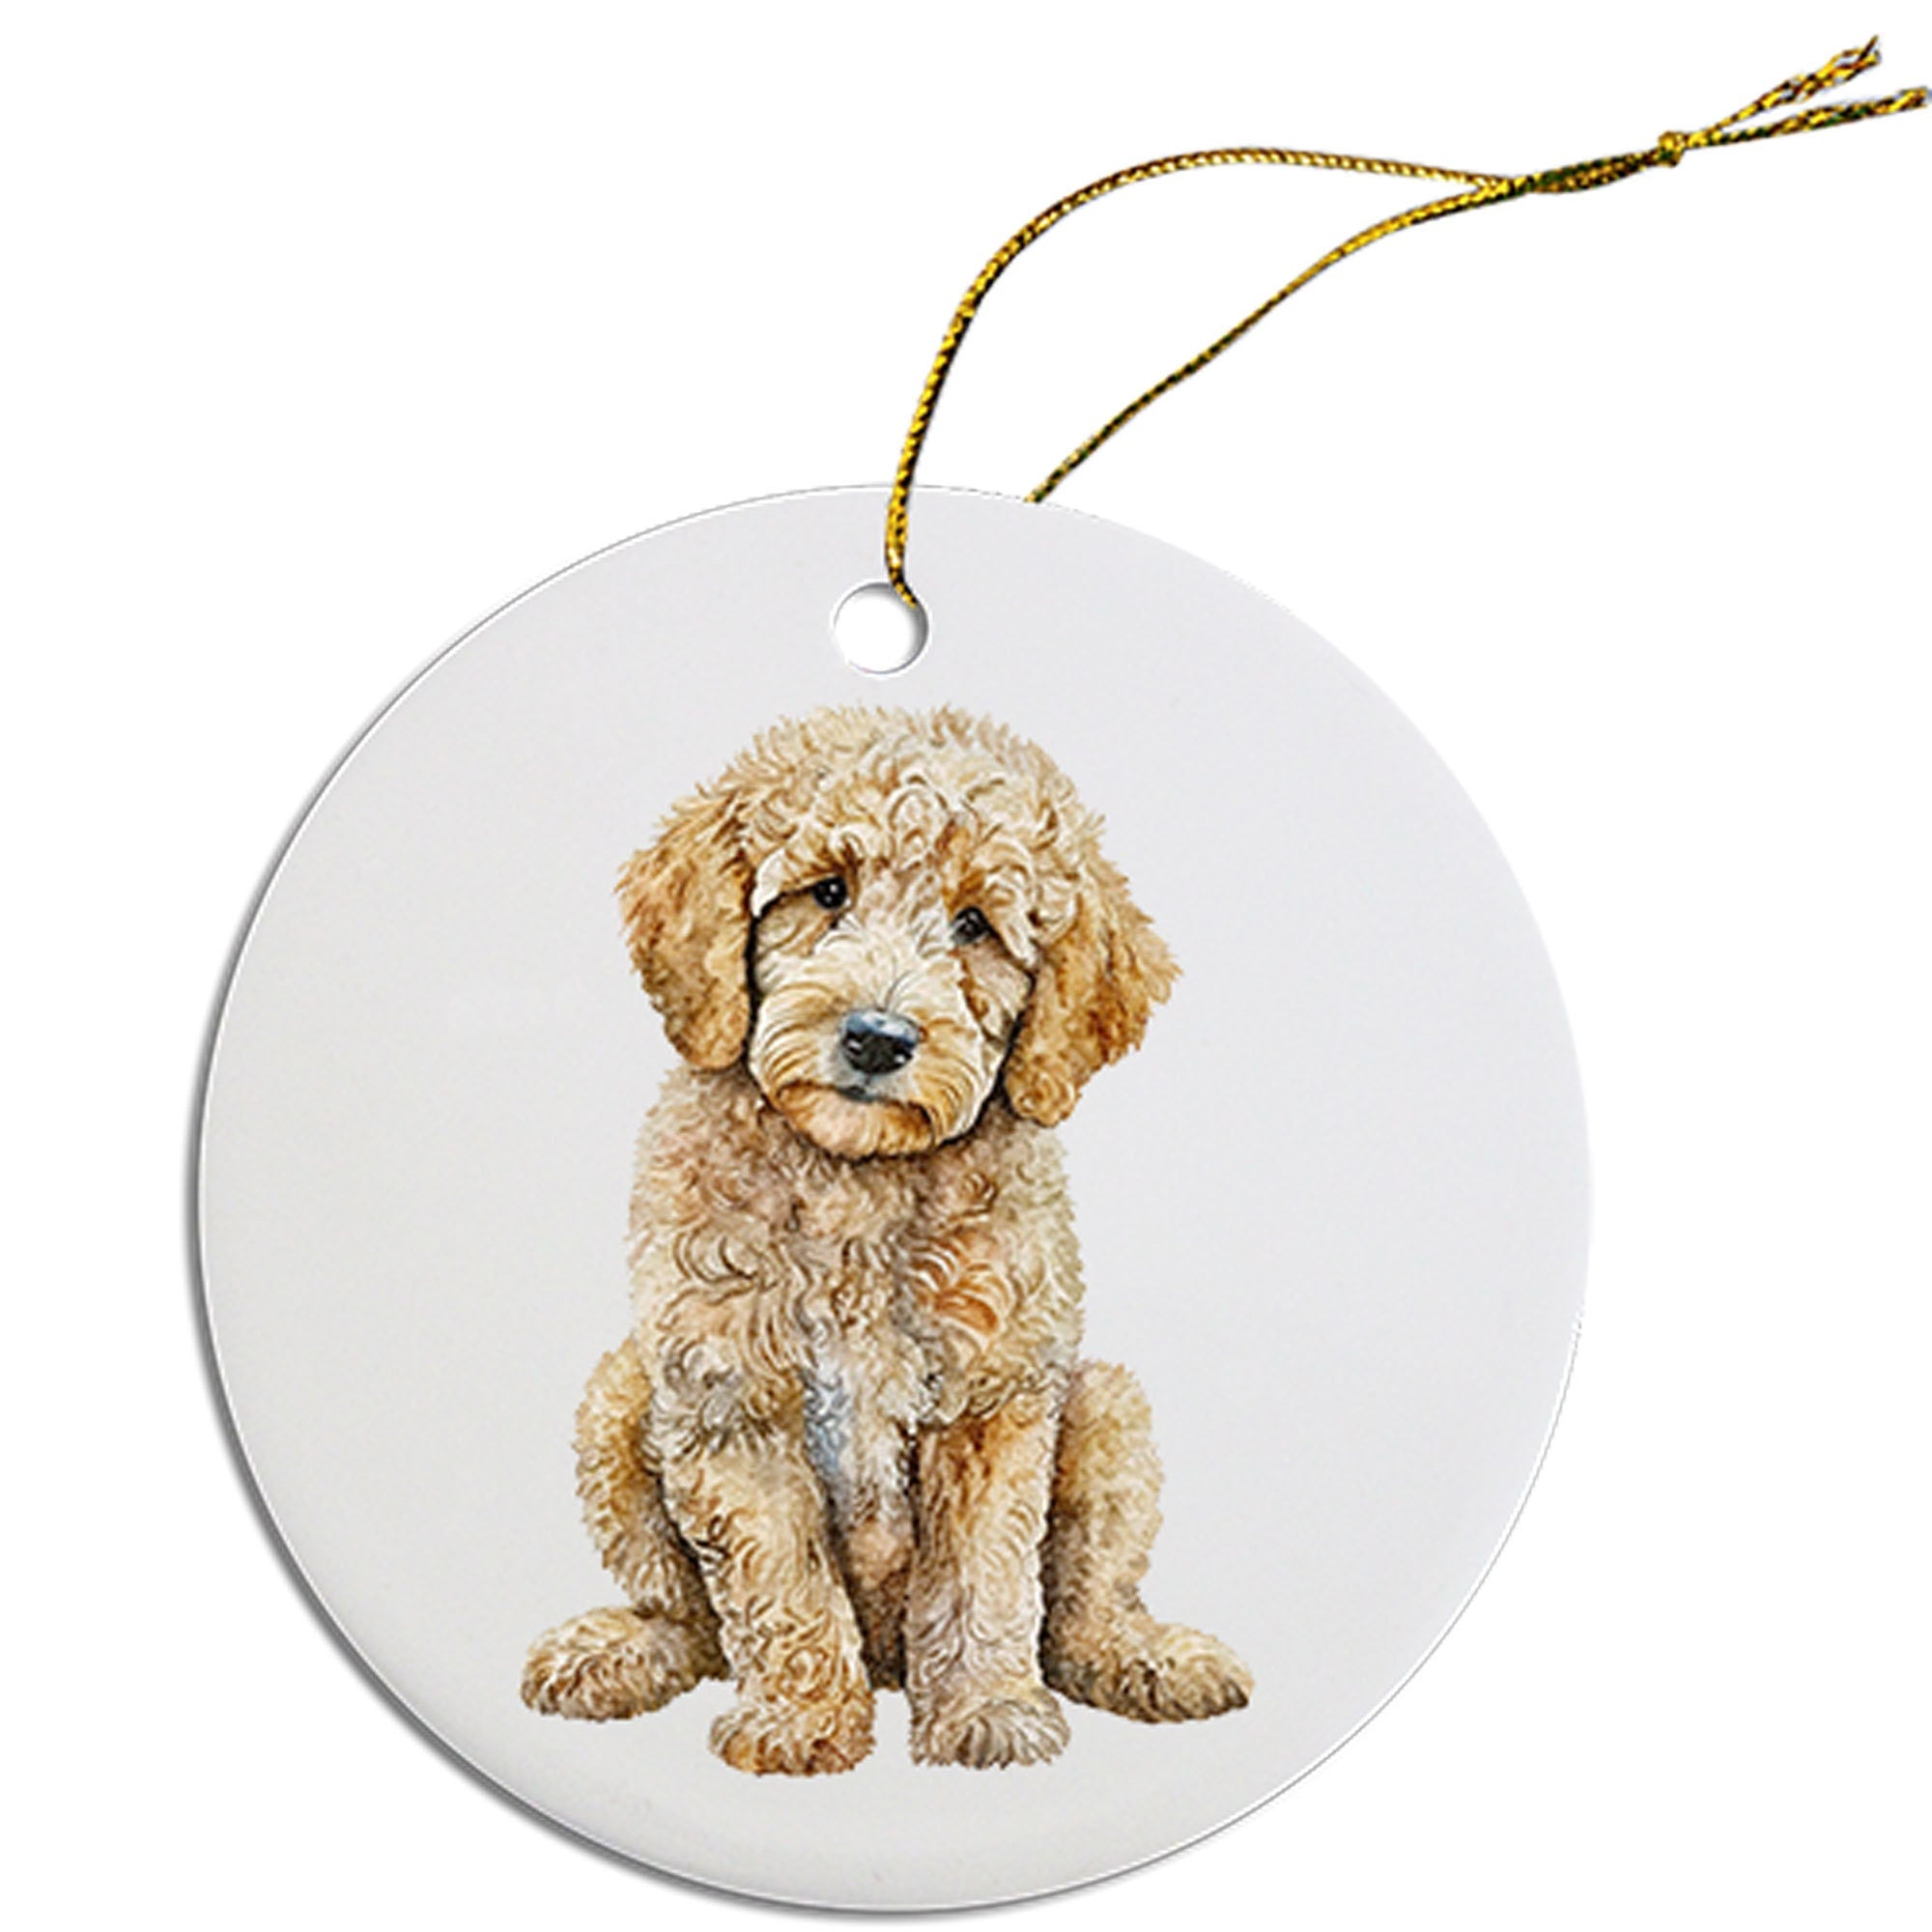 Dog Breed Specific Round Christmas Ornament, "Goldendoodle"